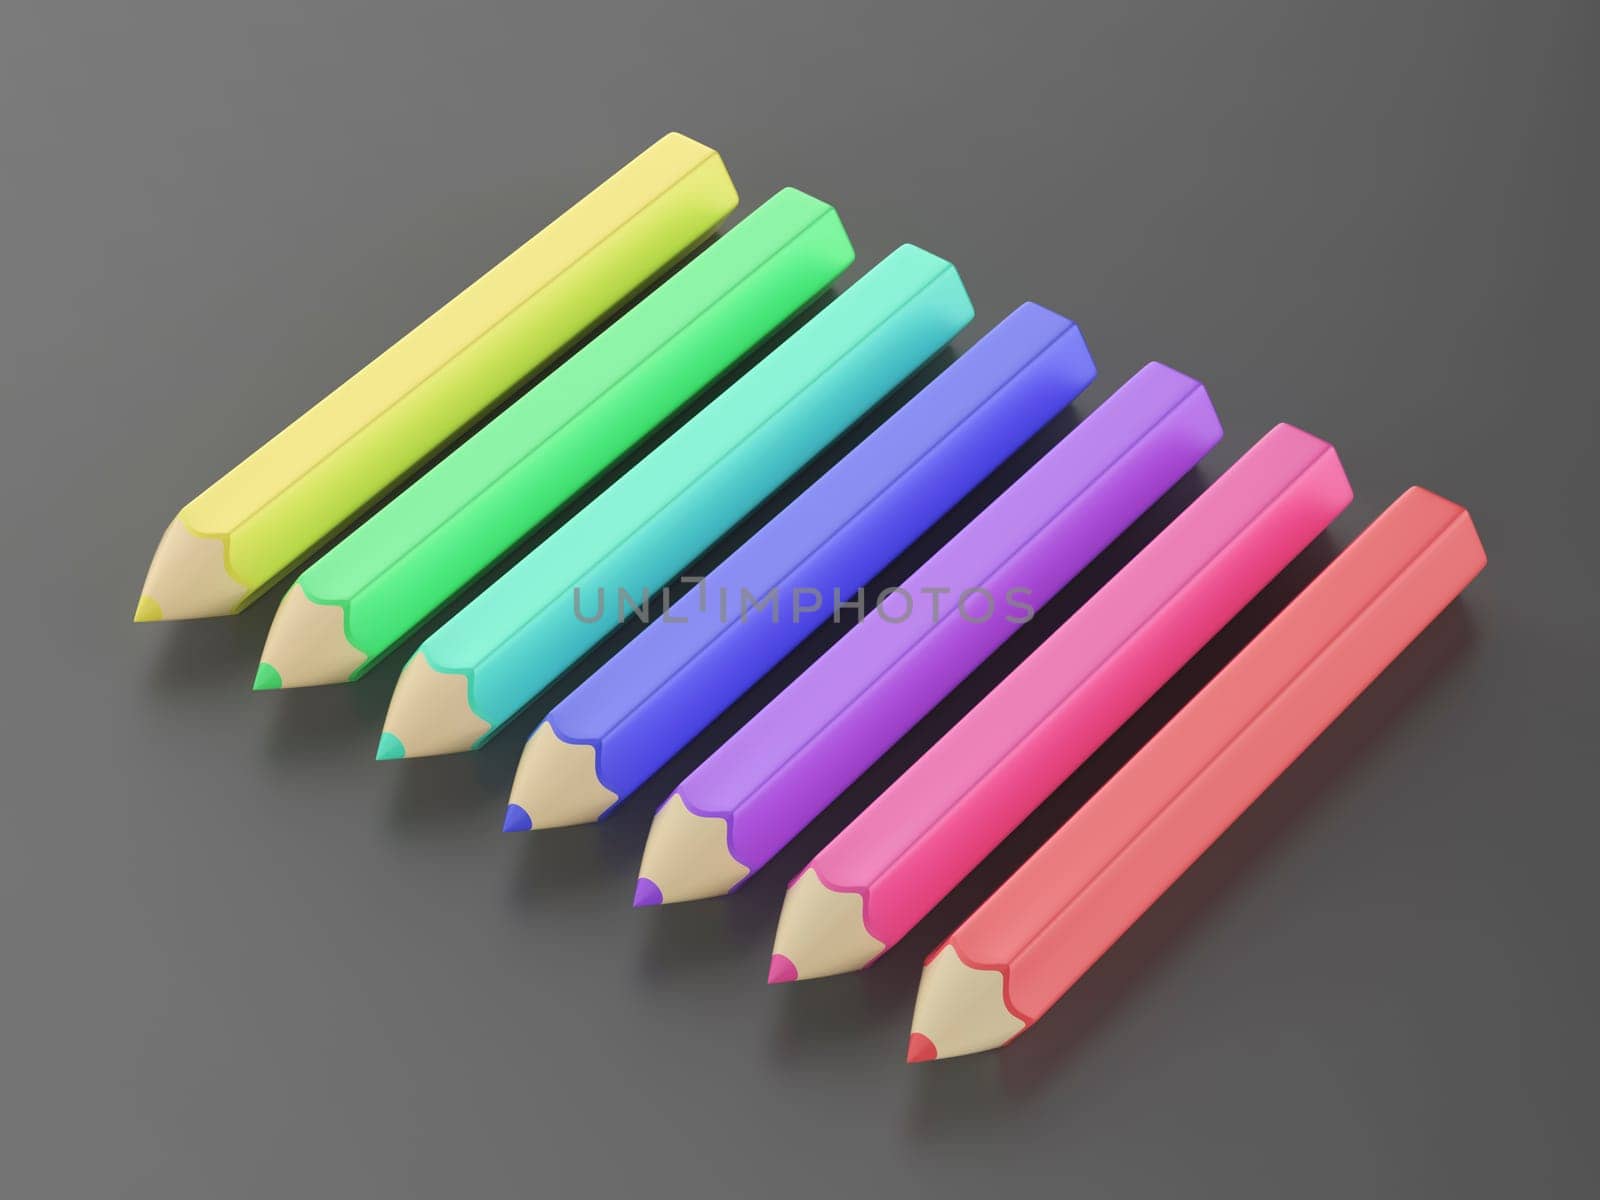 Set of seven cartoon style colored pencils on grey background